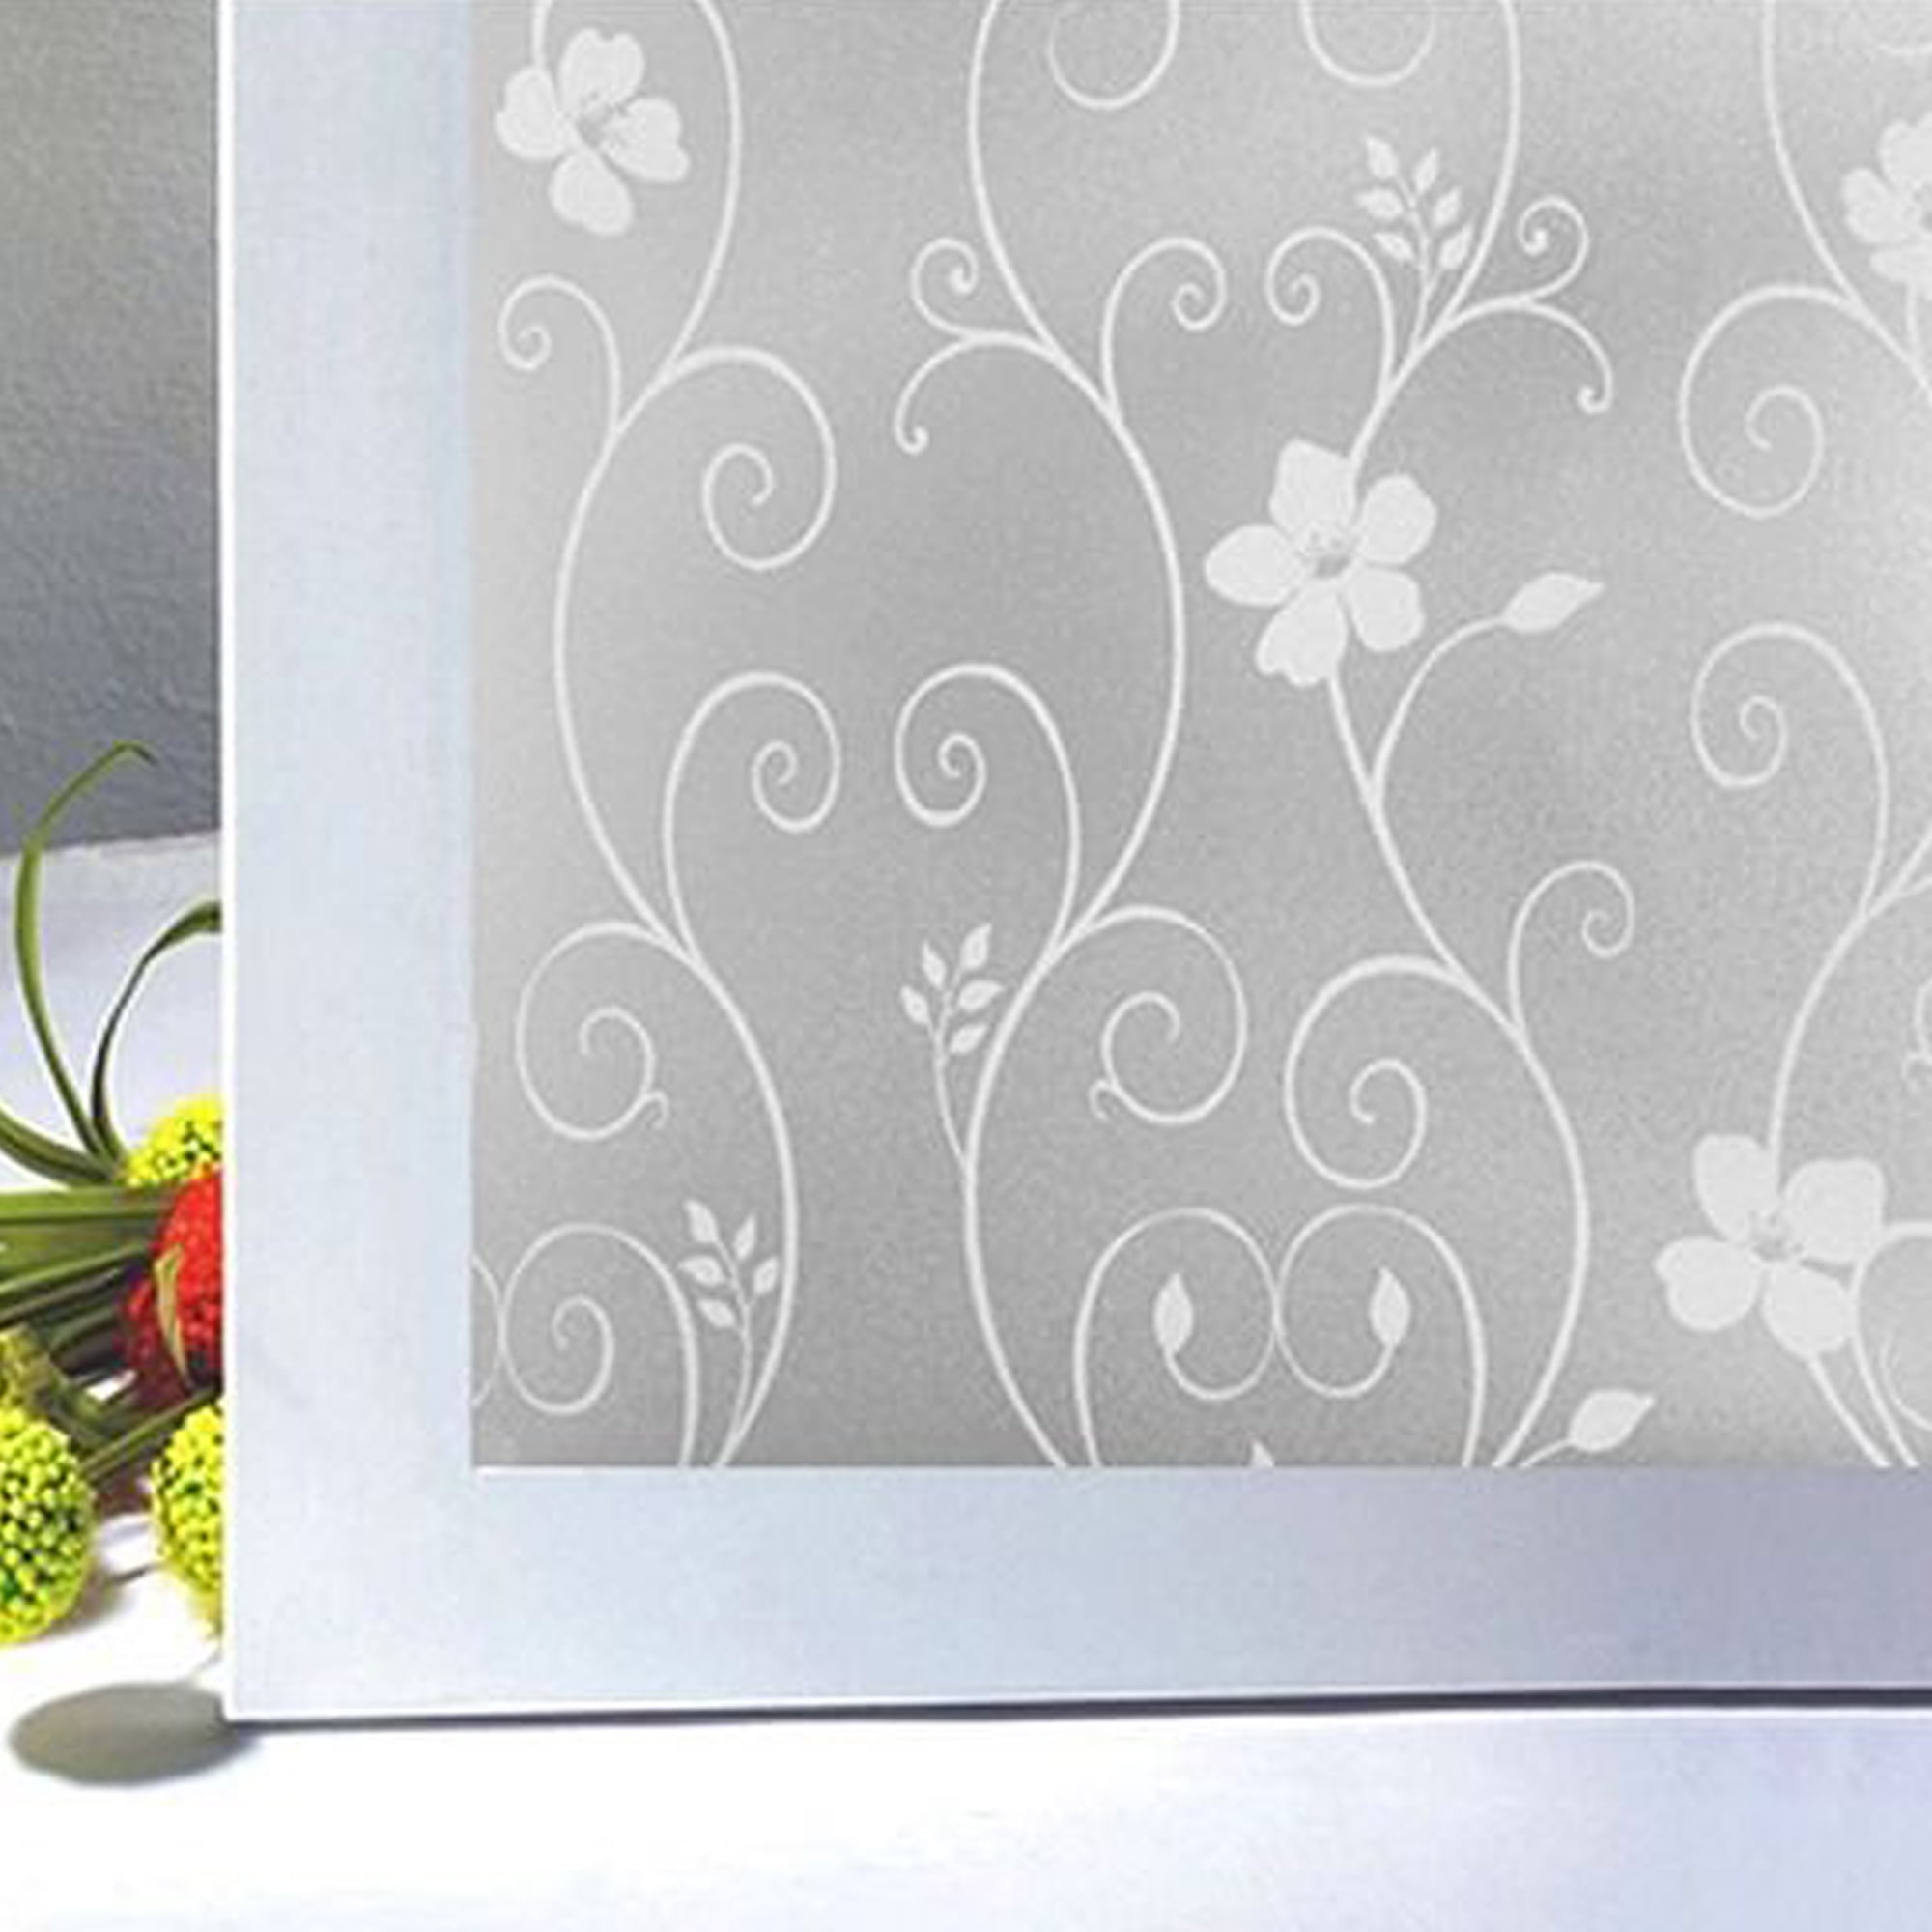 Details about   3D 78" Waterproof Frosted Privacy Bedroom Bathroom Window Glass Film Sticker New 